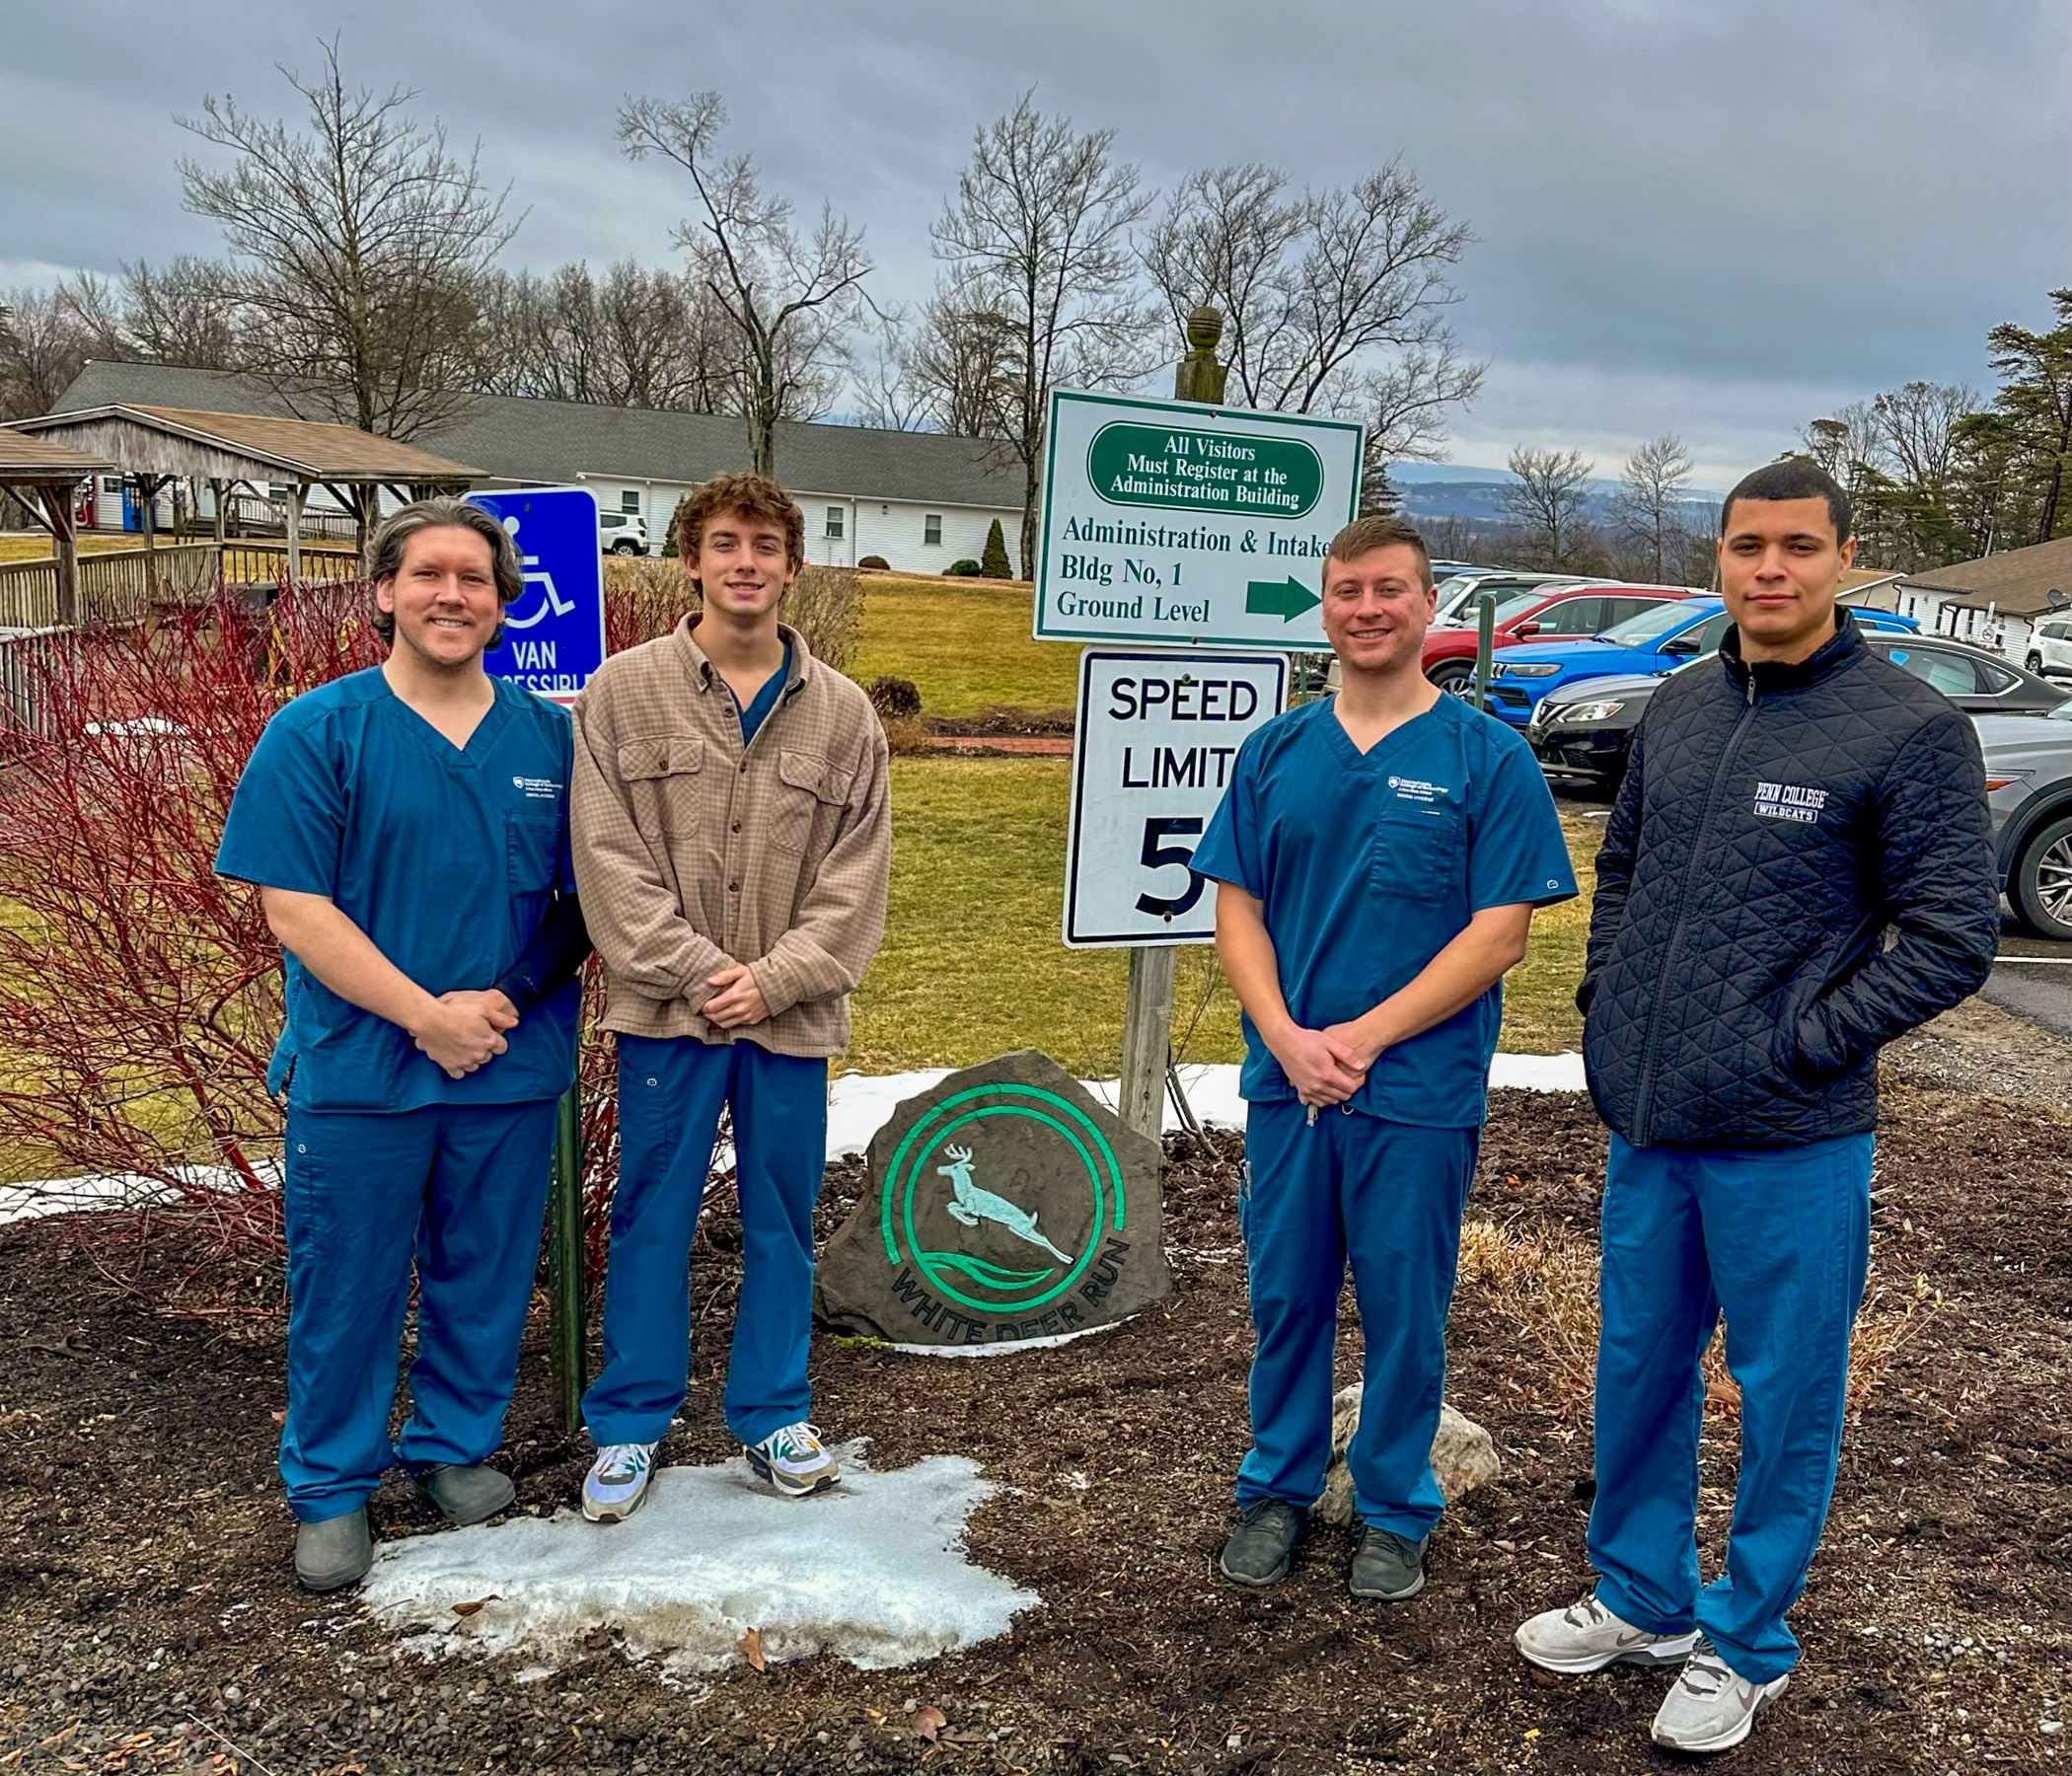 Students provide oral health care at White Deer Run facility